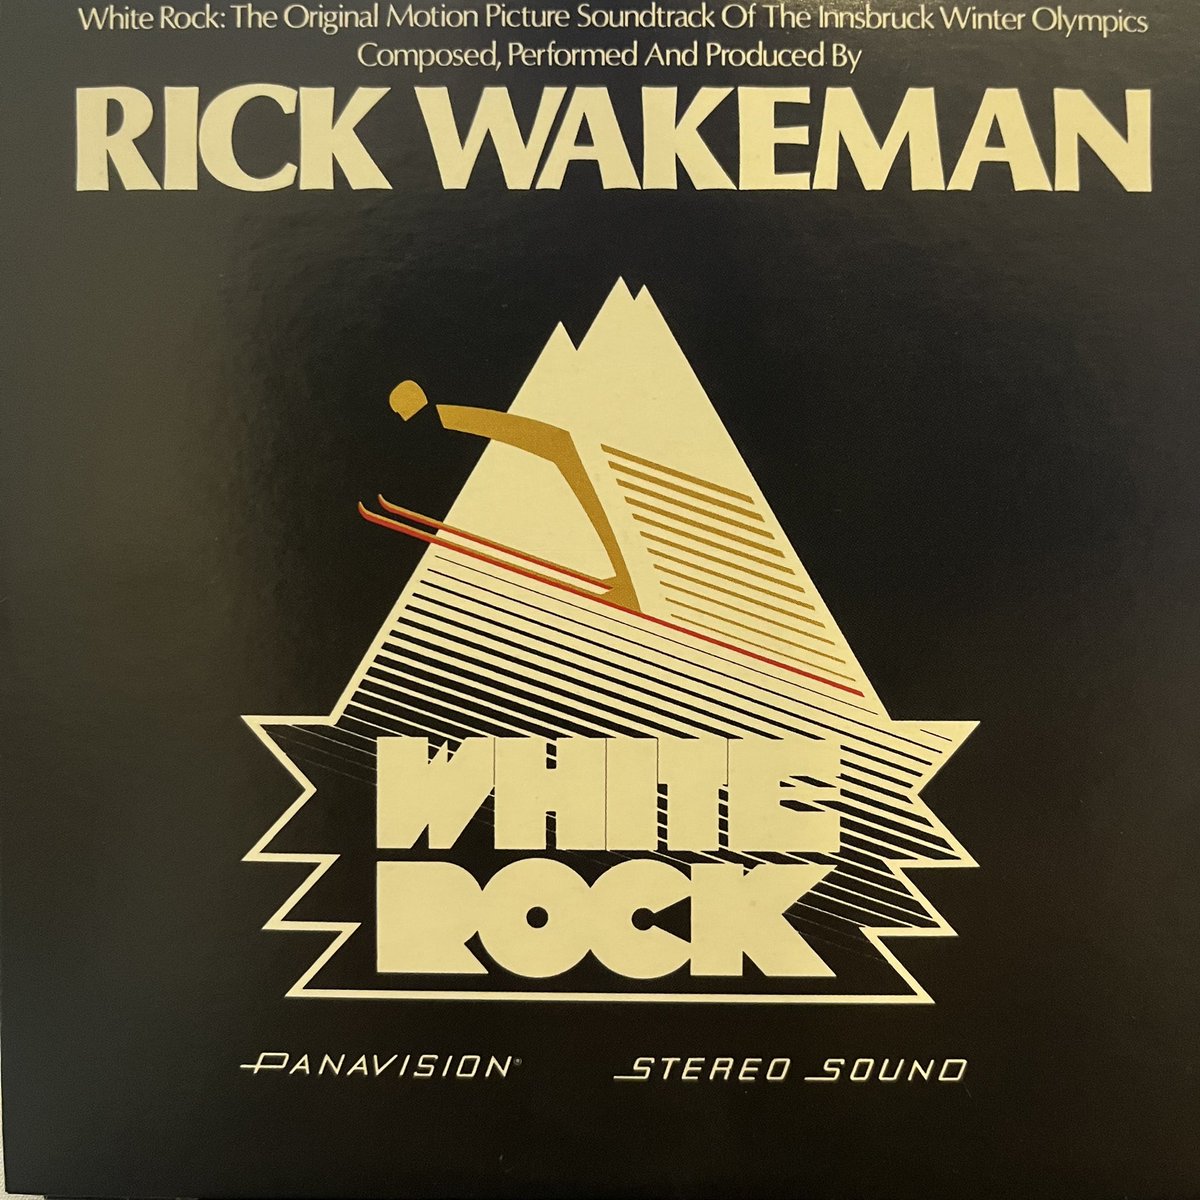 #NowPlaying Rick Wakeman - White Rock

Definitely stands out from the rest of the boxset due to being a soundtrack. Lacking a coherent musical structure and band it took a few listens but it has grown on me. 

Thoughts on this one?

#rickwakeman #prog #progrock #70smusic